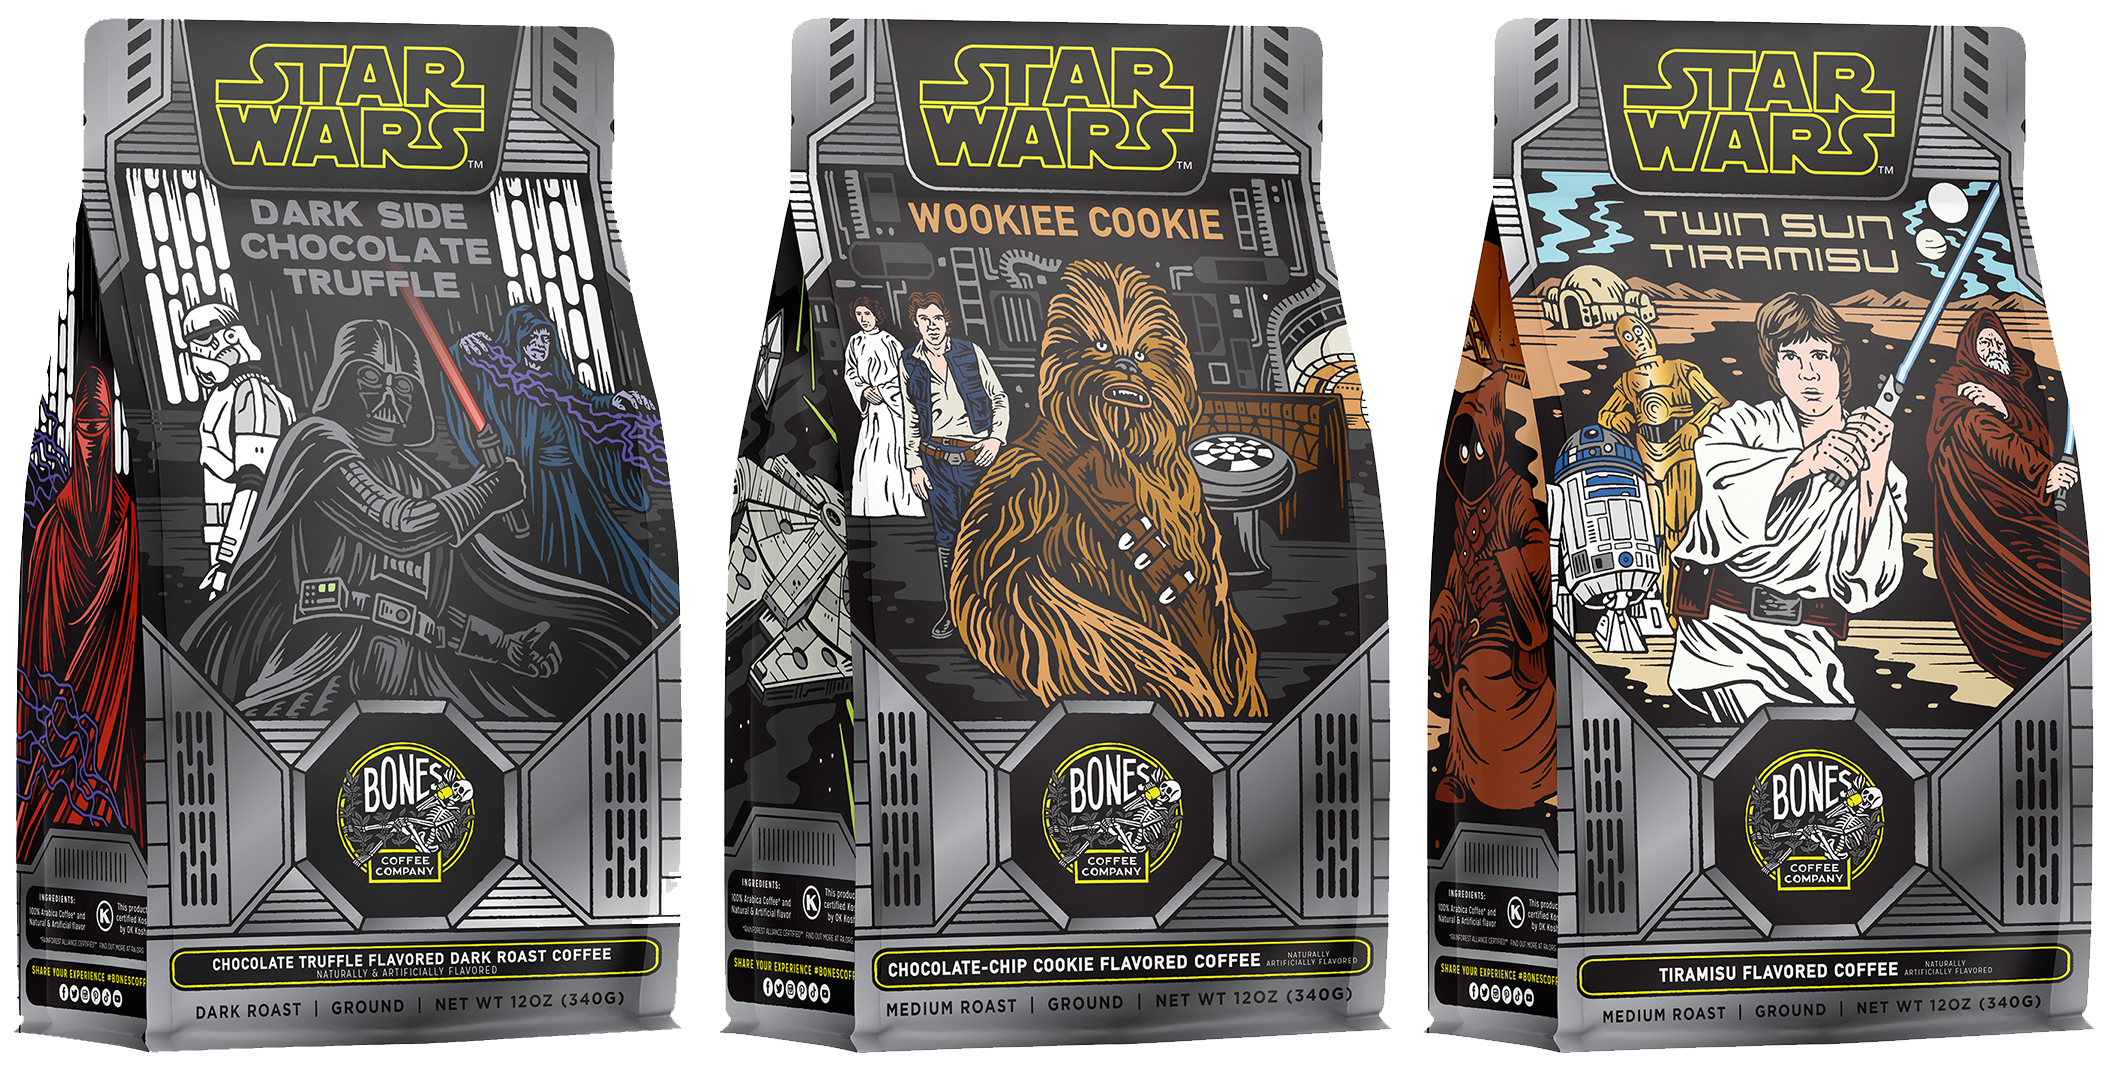 Three 12 ounce bags of flavored coffee inspired by Lucasfilm’s Star Wars. From left to right their names are Dark Side Chocolate Truffle, Wookiee Cookie, and Twin Sun Tiramisu. Their arts feature Darth Vader, Chewy, and Luke Skywalker respectively.